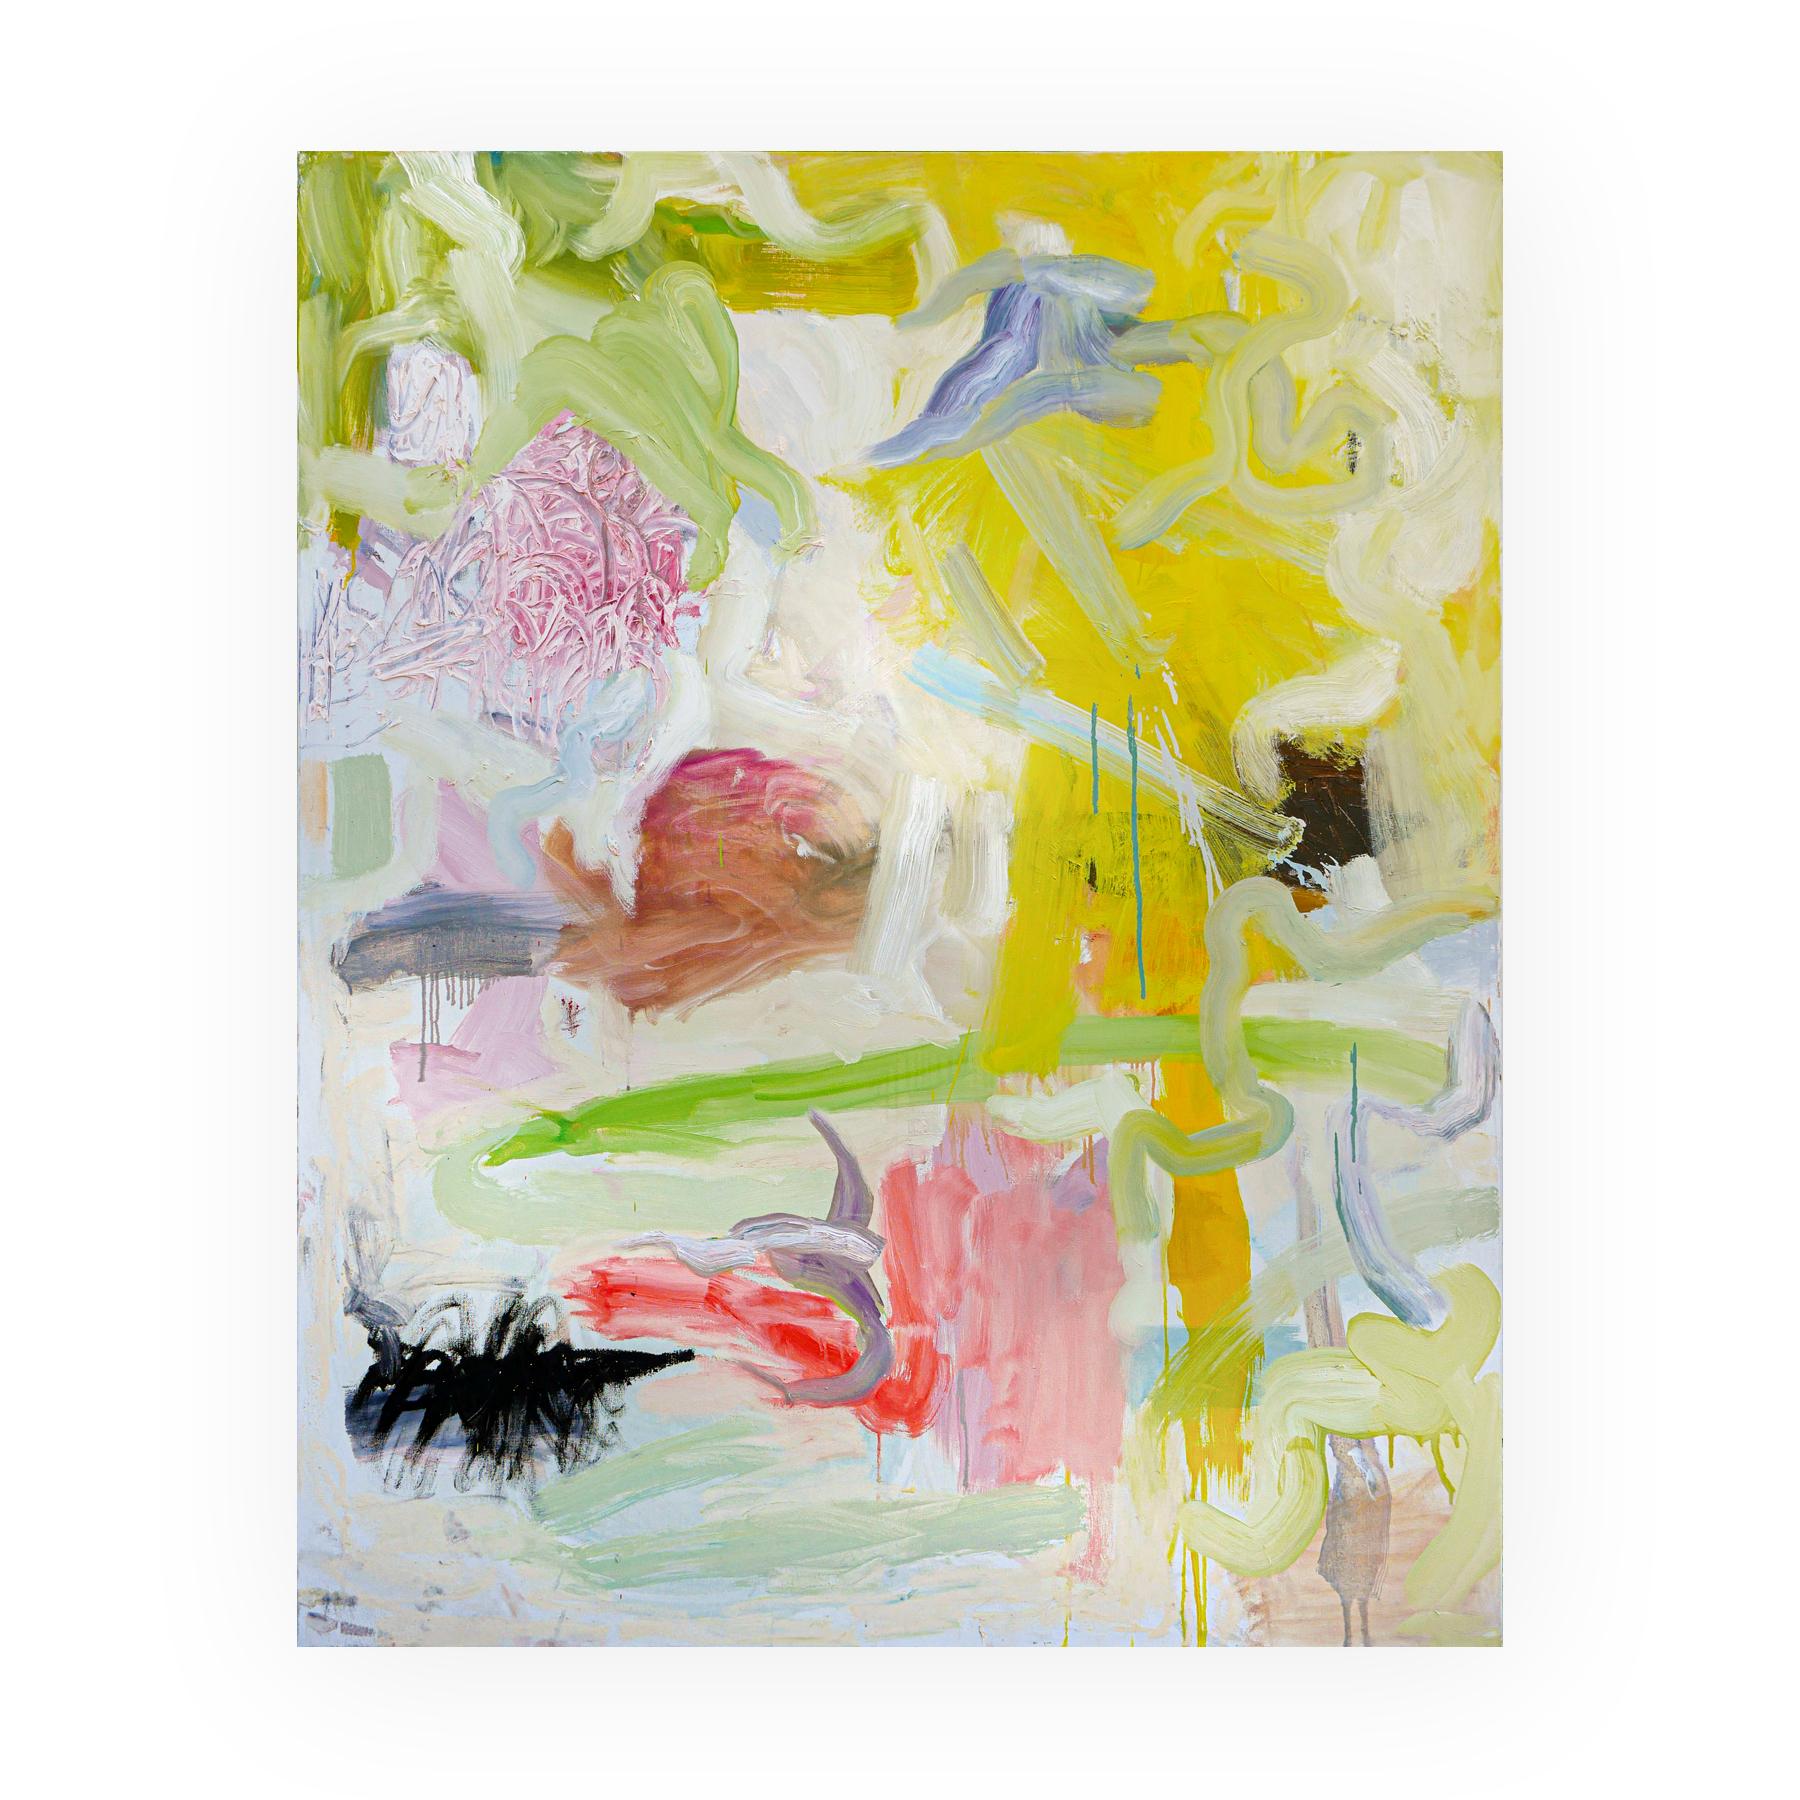 Contemporary colorful pastel abstract painting by local Houston artist Benji Stiles. The painting depicts light green, peach, dark deep blue, and a bright red shape against a light green and gray background. Unframed but framing options are